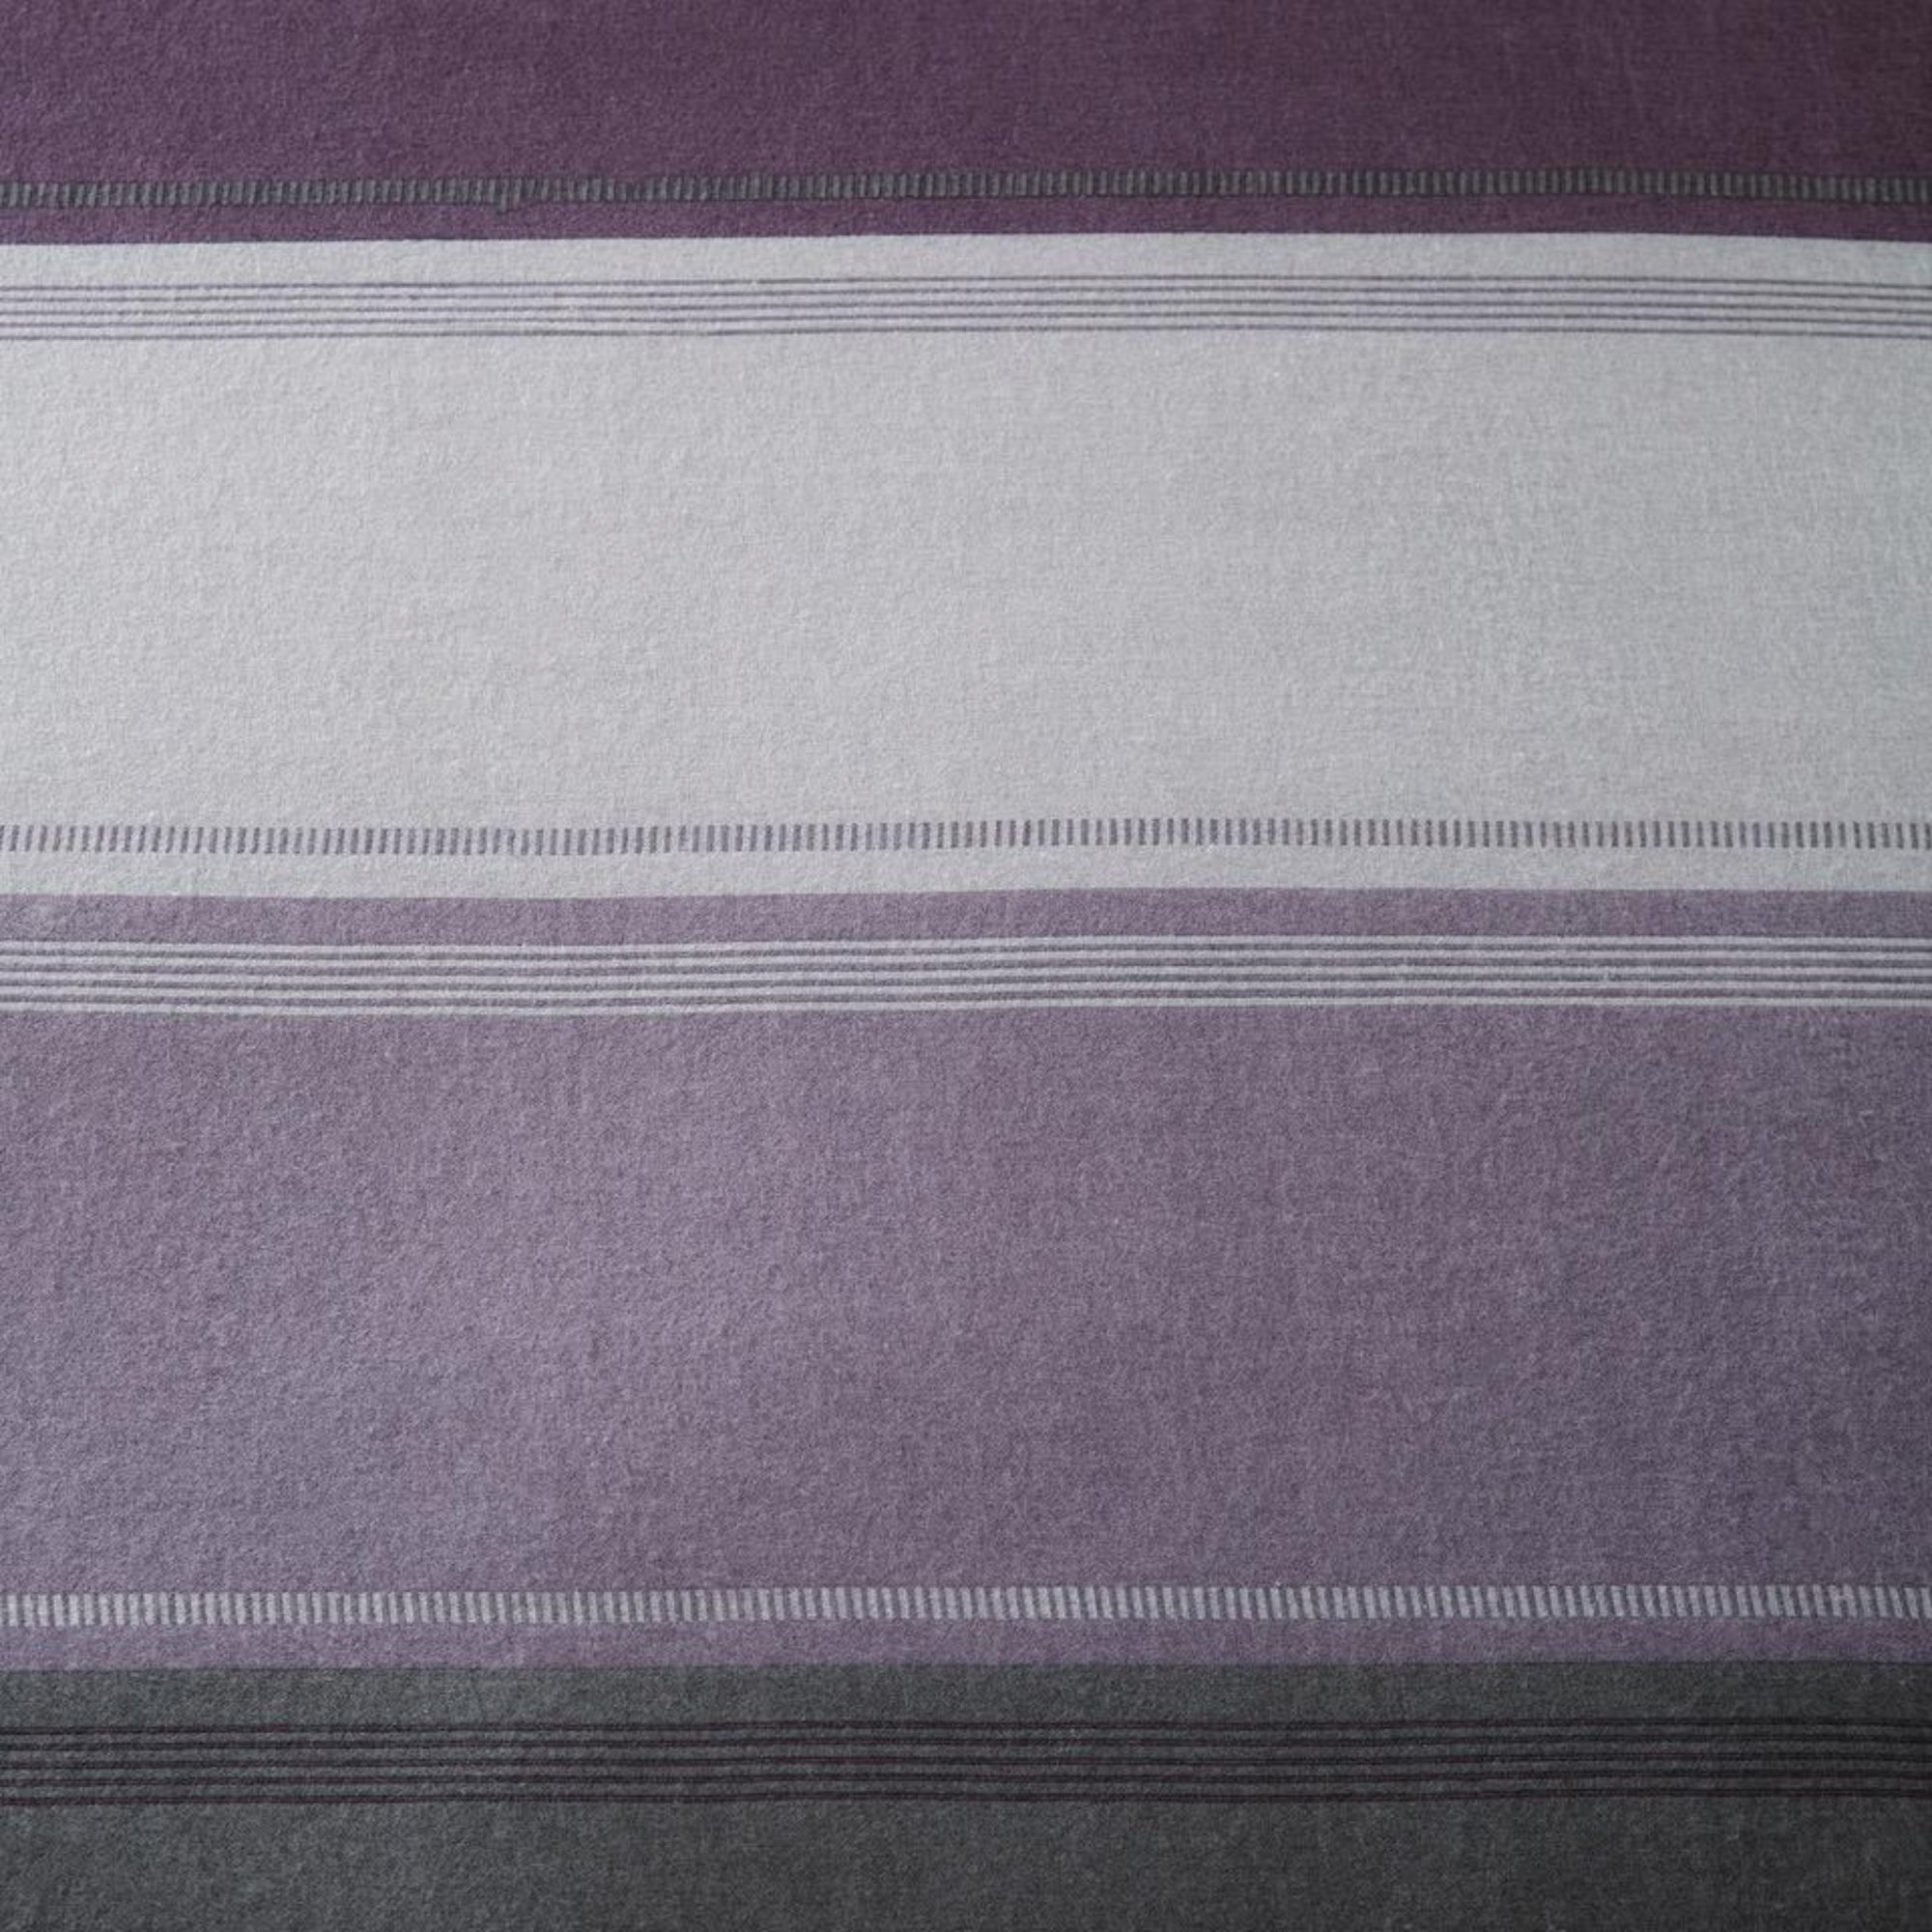 Duvet Cover Set Betley Brushed by Fusion Snug in Plum